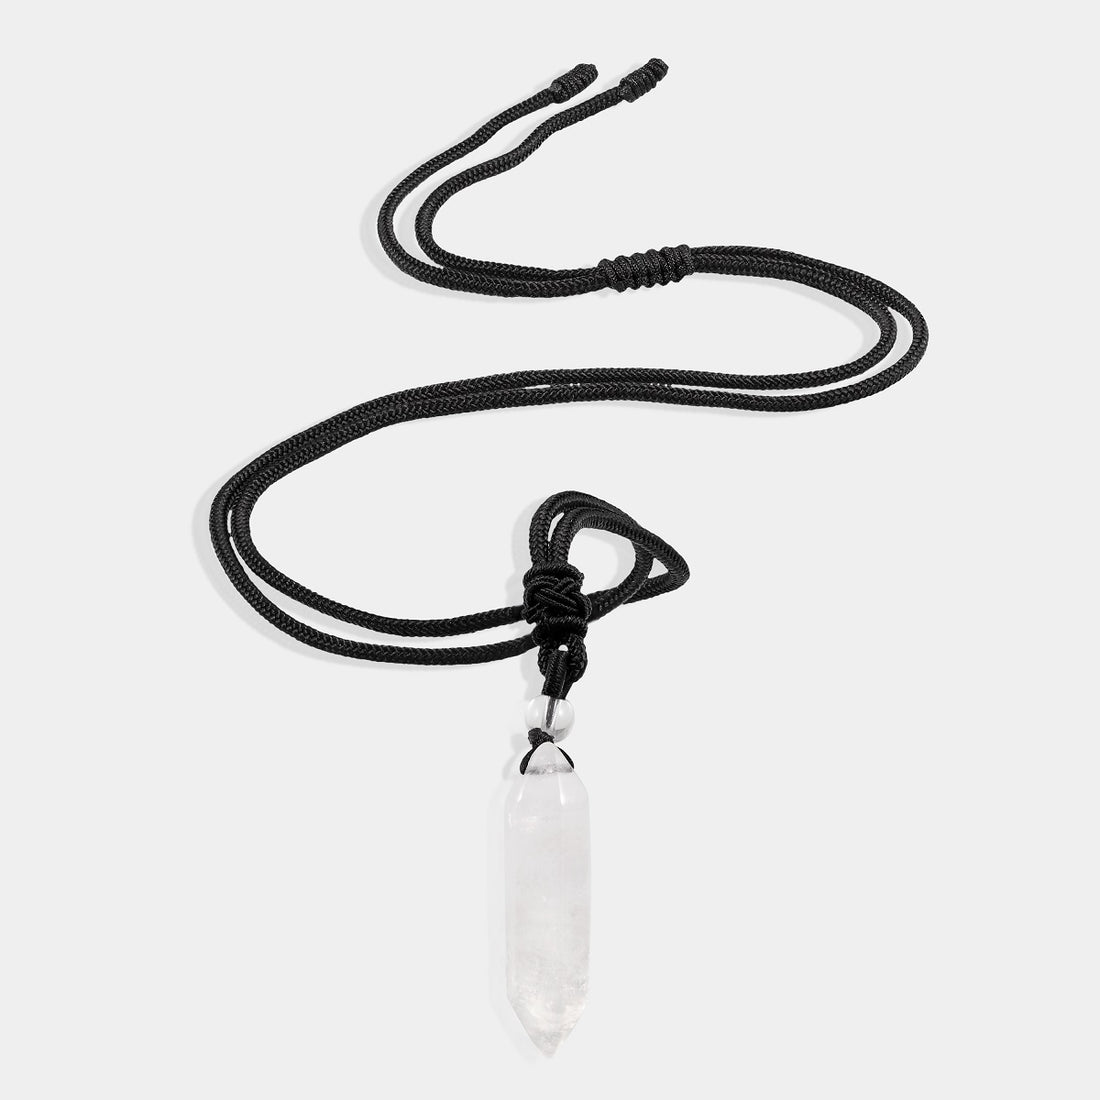 A stunning pendant necklace featuring a natural white quartz gemstone in a hexagon-cut, wrapped in an intricate design.